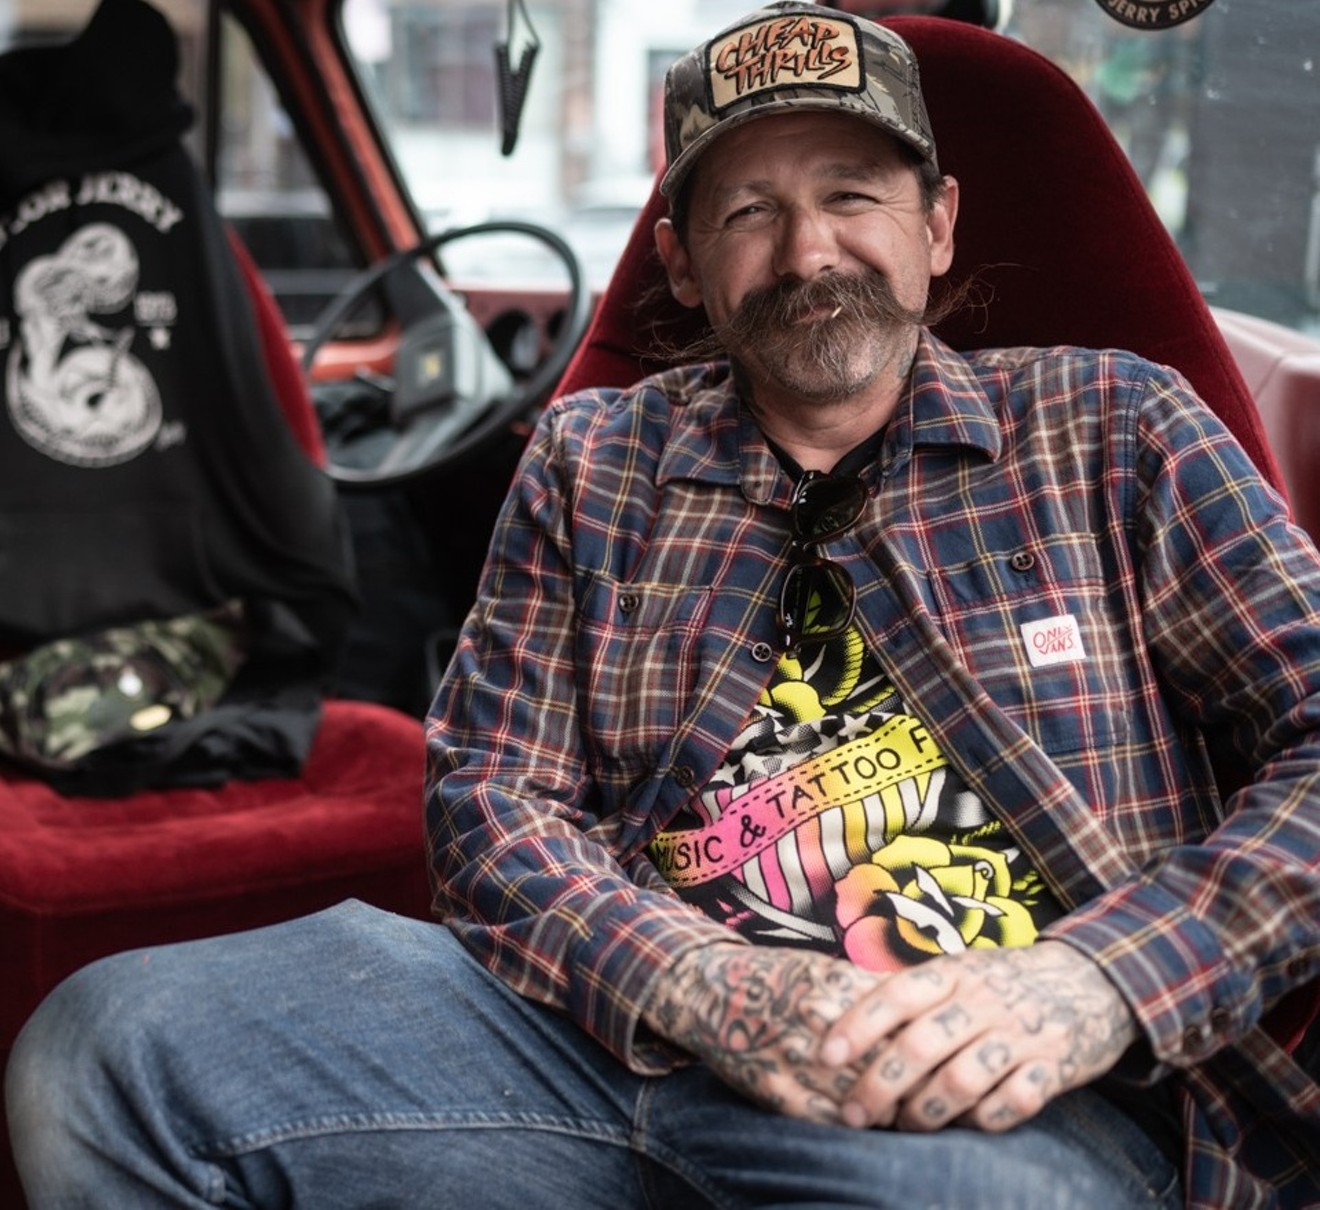 Oliver Peck, pictured at the Elm St. Music and Tattoo Festival in May 2019